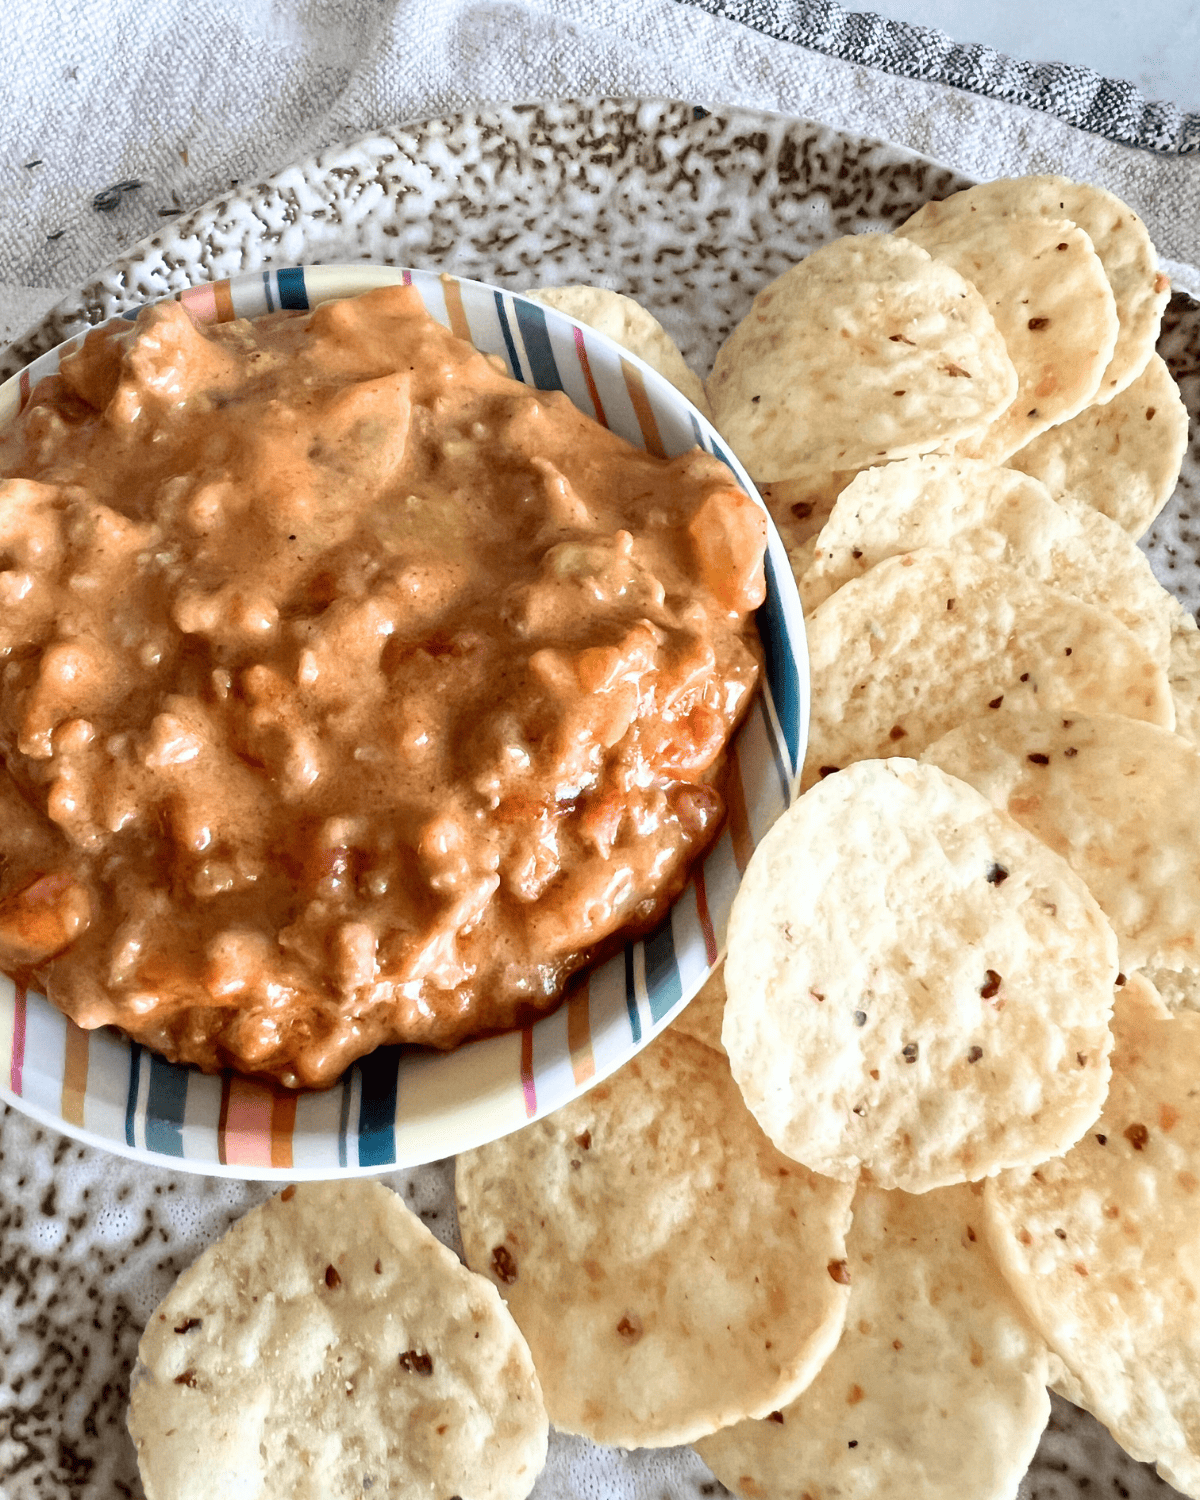 smoked queso dip in a bowl next to chips on a speckled pottery plate 